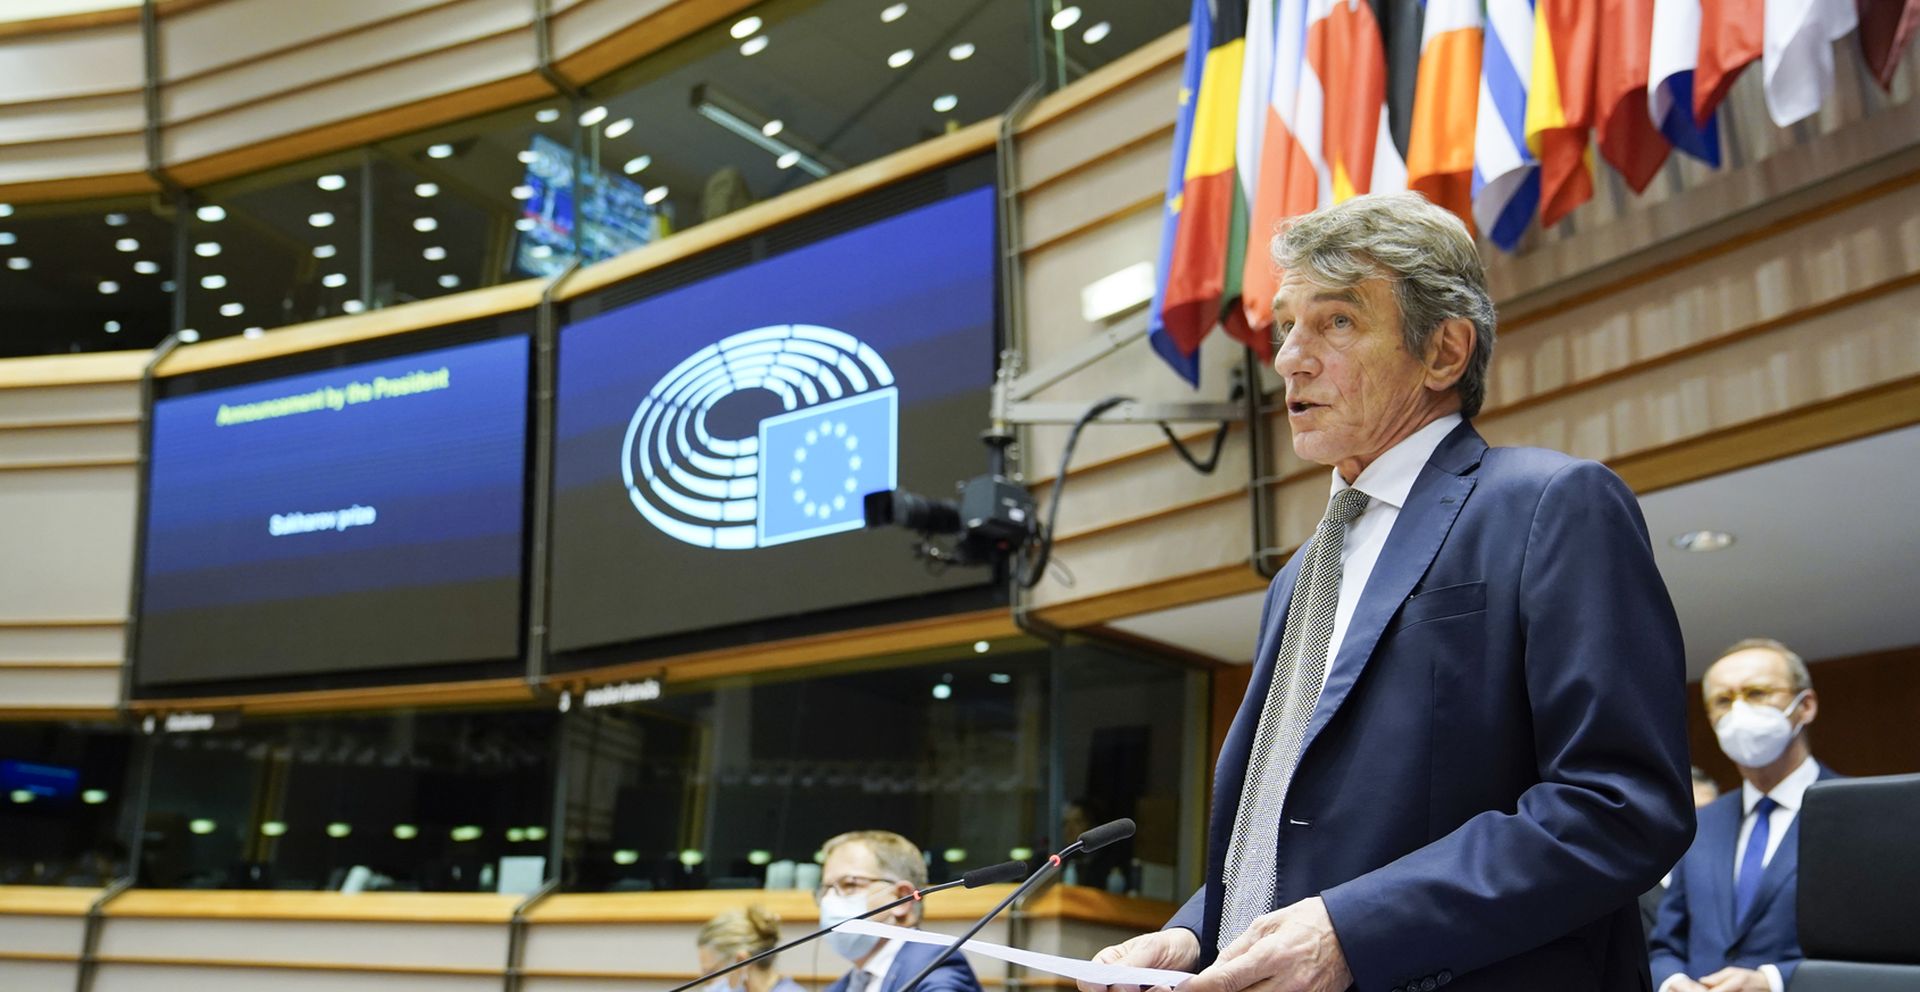 EP plenary session -  Announcement of the Sakharov Prize 2020 by David SASSOLI, EP President